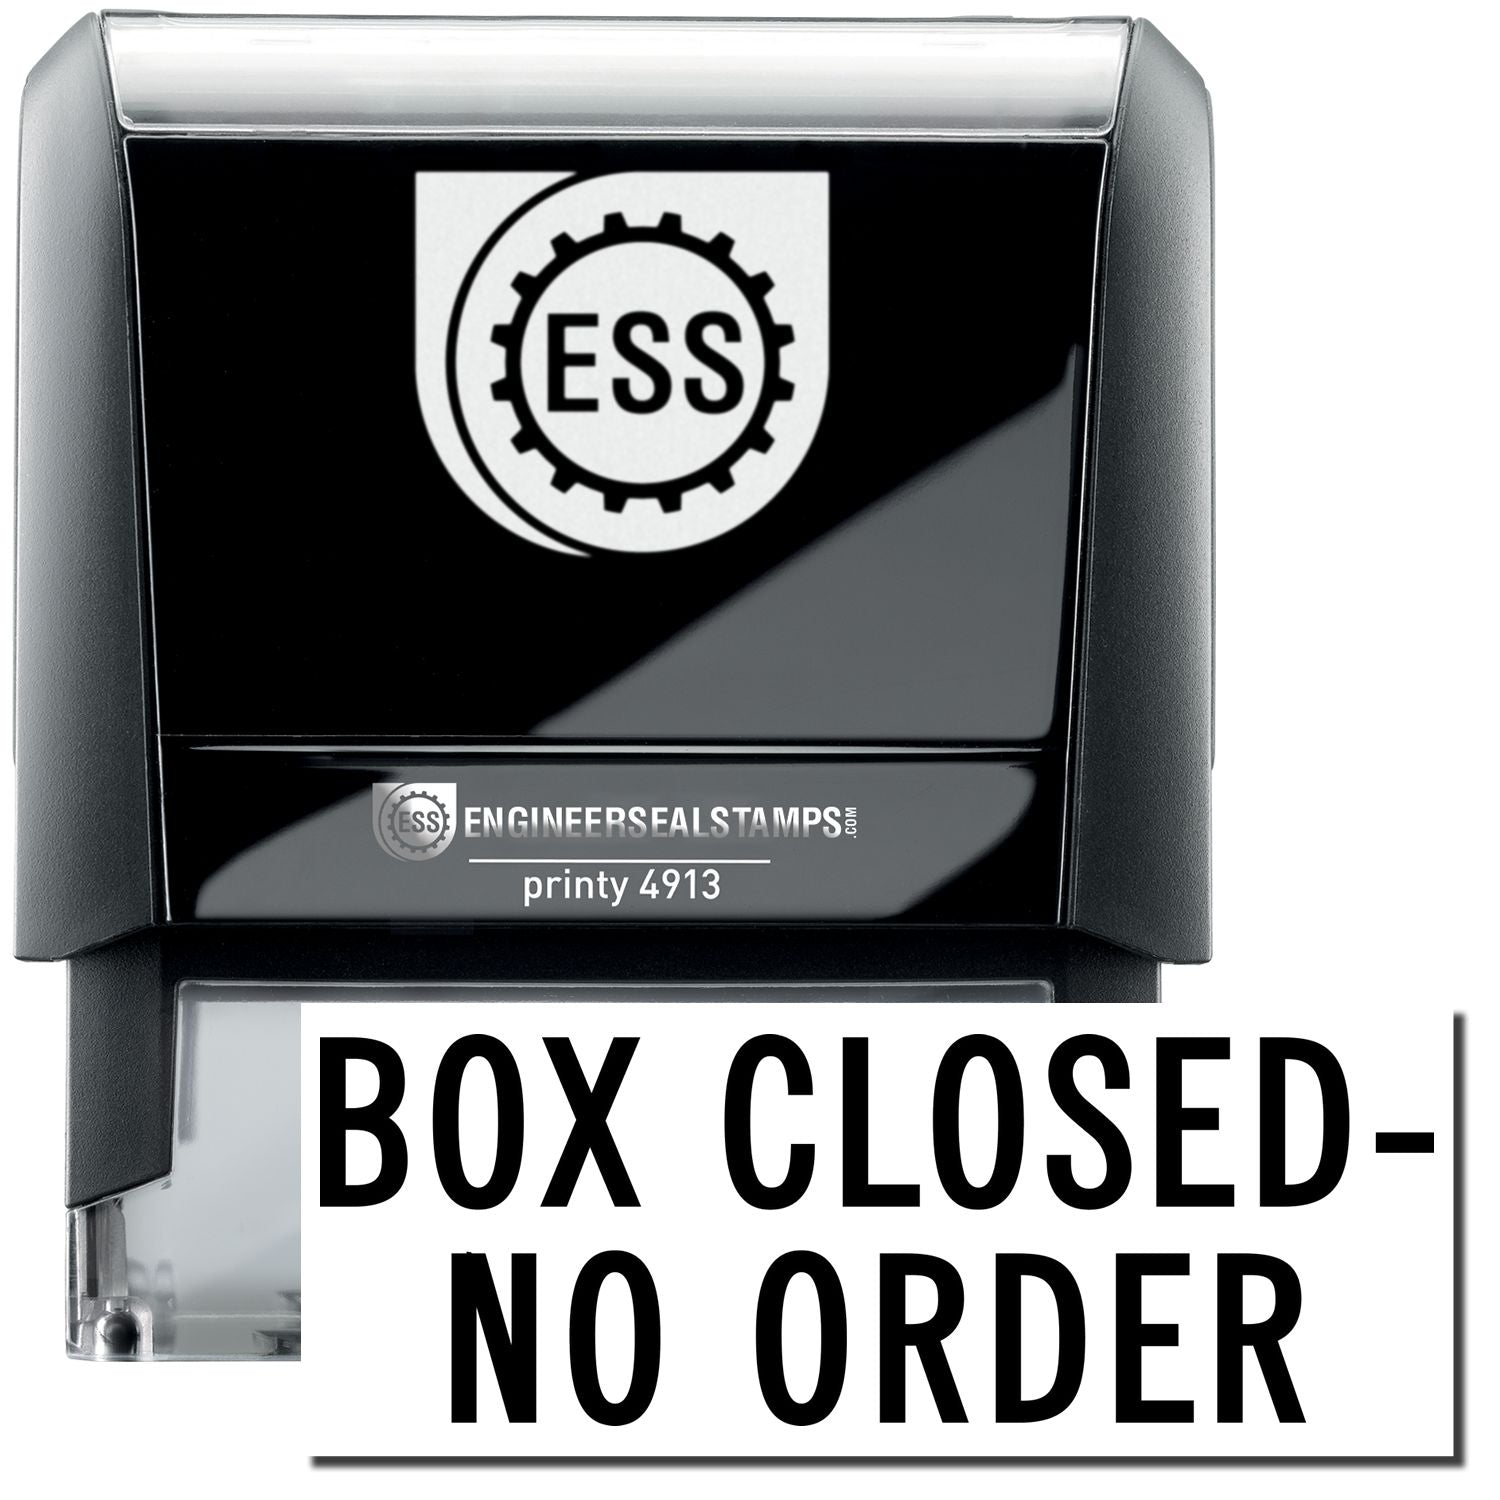 A self-inking stamp with a stamped image showing how the text "BOX CLOSED - NO ORDER" in a large font is displayed by it after stamping.